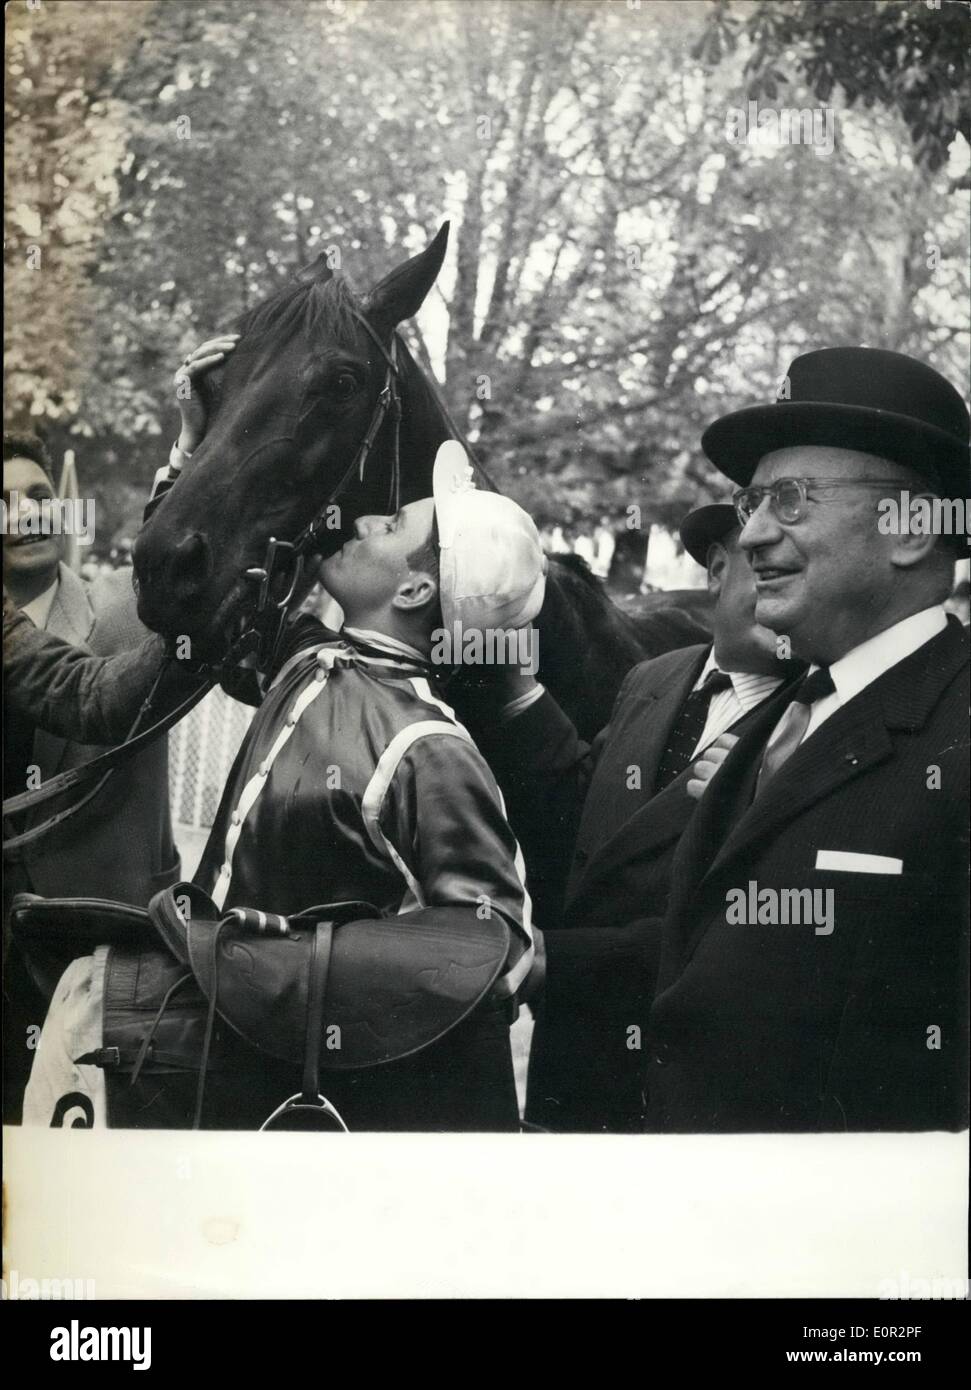 Oct. 10, 1957 - Outside ins Arc De Trimphe Race : Oroso, an Outsider, won the arc De Triophe race, The famous event coupled with the sweepstake. photo shows Serge Boollenger, the Jockey, kissing his horse. Next to the horse is the owner, M. Raoul Meyer. Stock Photo